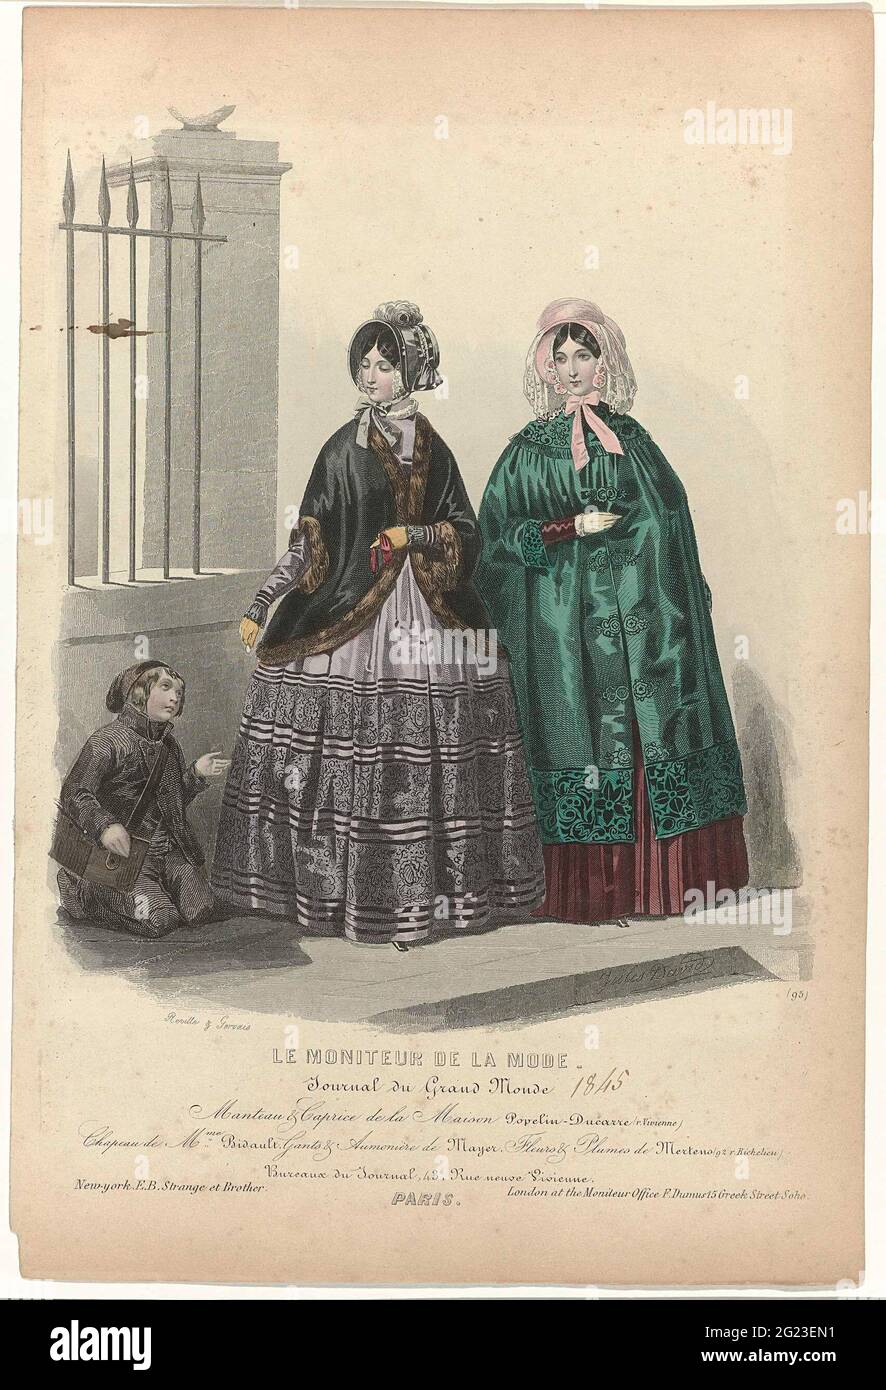 Platteland Verplaatsing Wat leuk Le Moniteur de la Mode, 1845, no. 95: Manteau & Caprice de la Maison (...).  Two women at a fence, one of whom one gives a coin to a beggar. According to